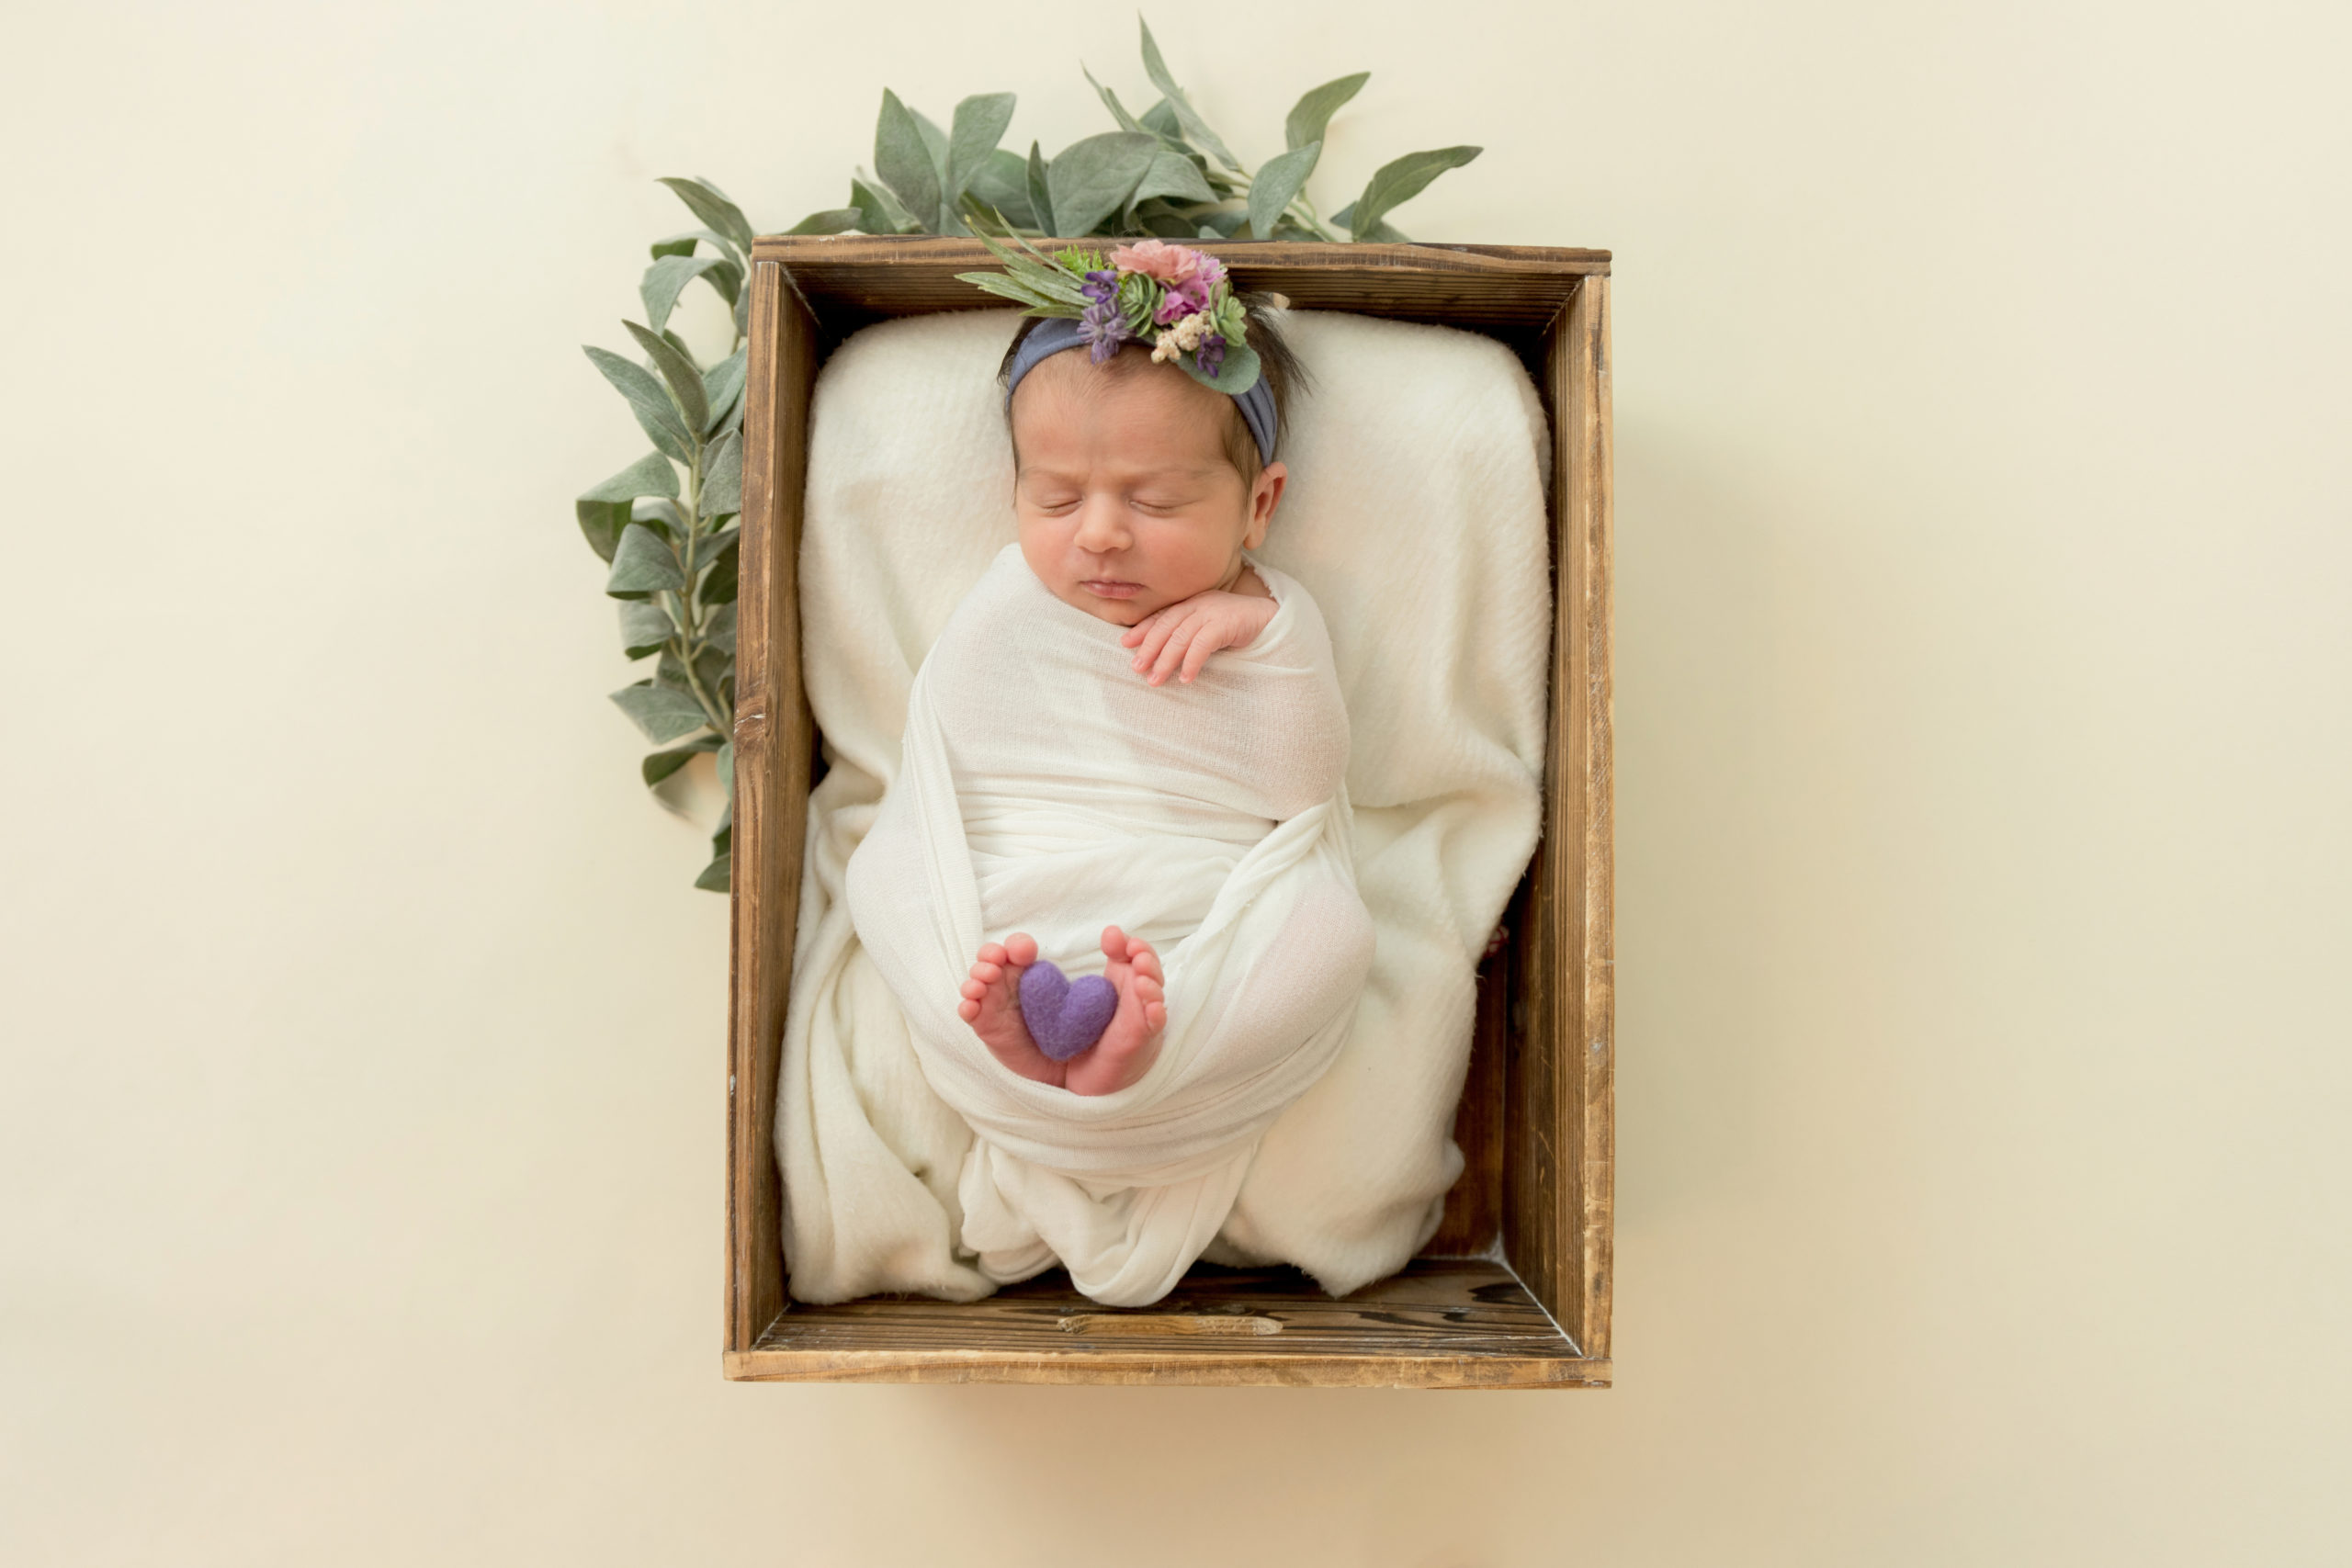 Baby in a wooden crate holding a purple felted heart- Lancaster Newborn Photography Session